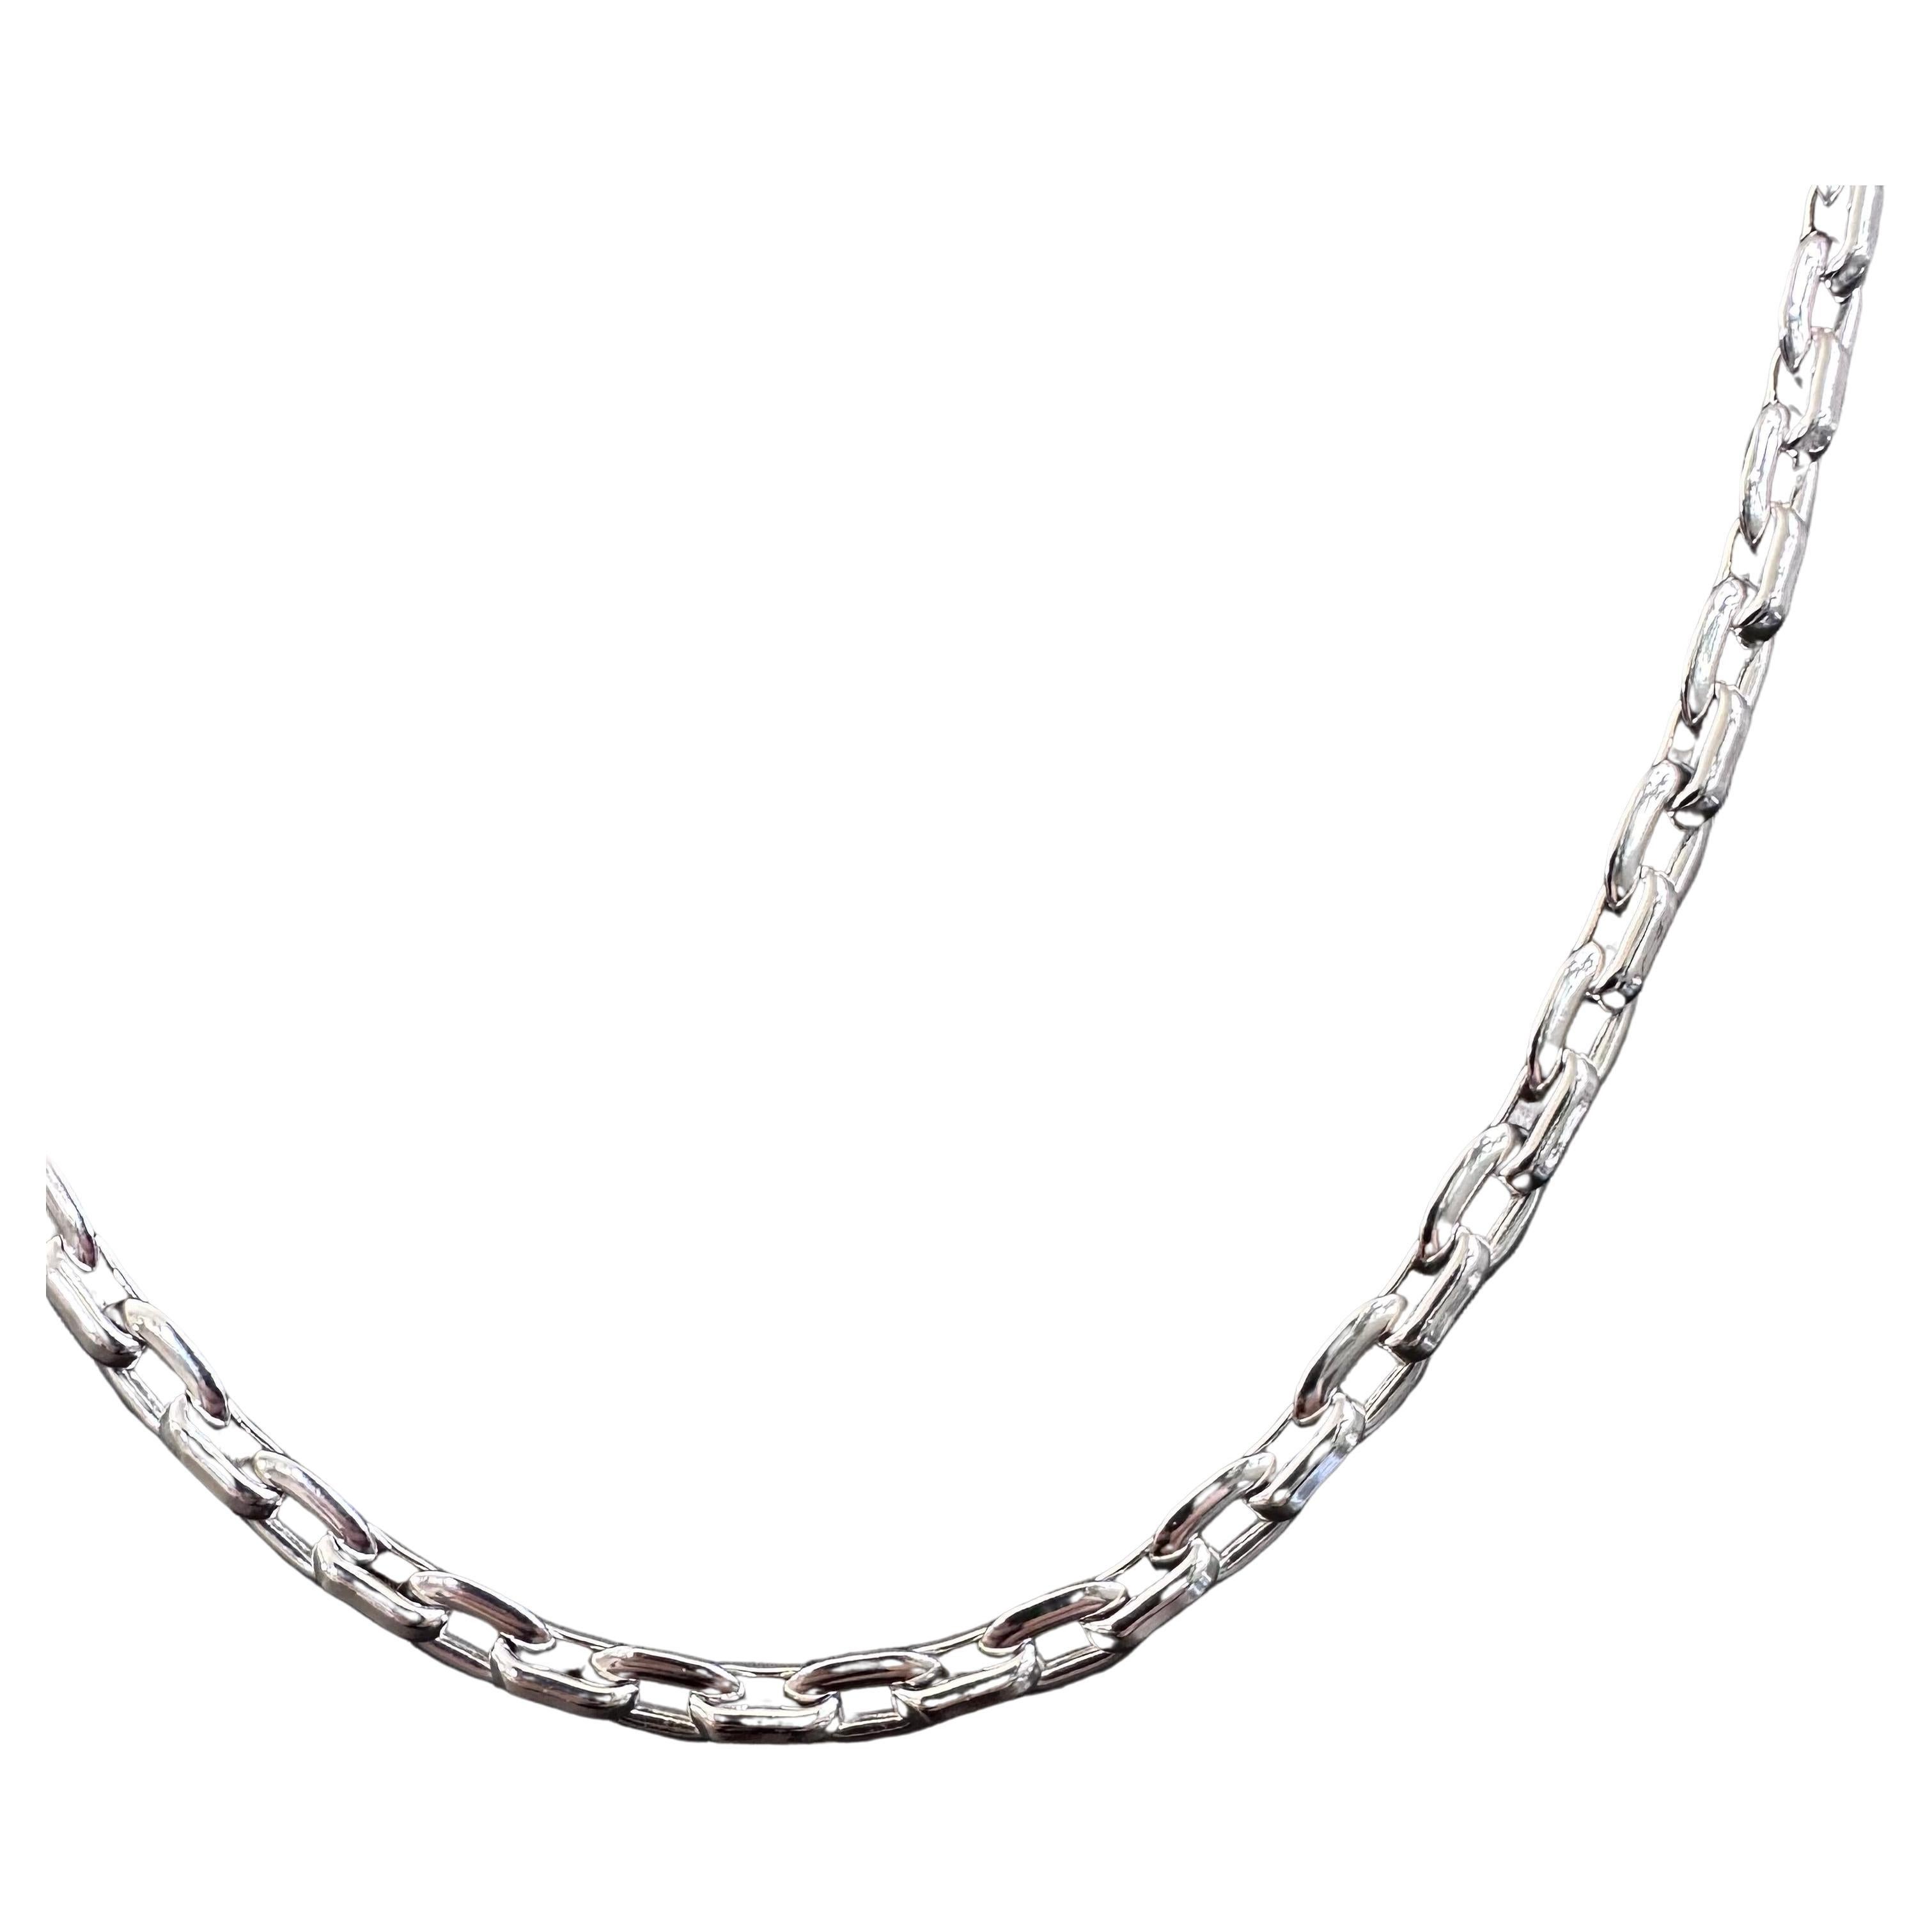 Cartier 18k White Gold Link Necklace 
45 CM or 17.75 Inches Length
35.3 Grams
18k White Gold 
Hallmarks Cartier 750 Numbered.
Lobster Clasp


